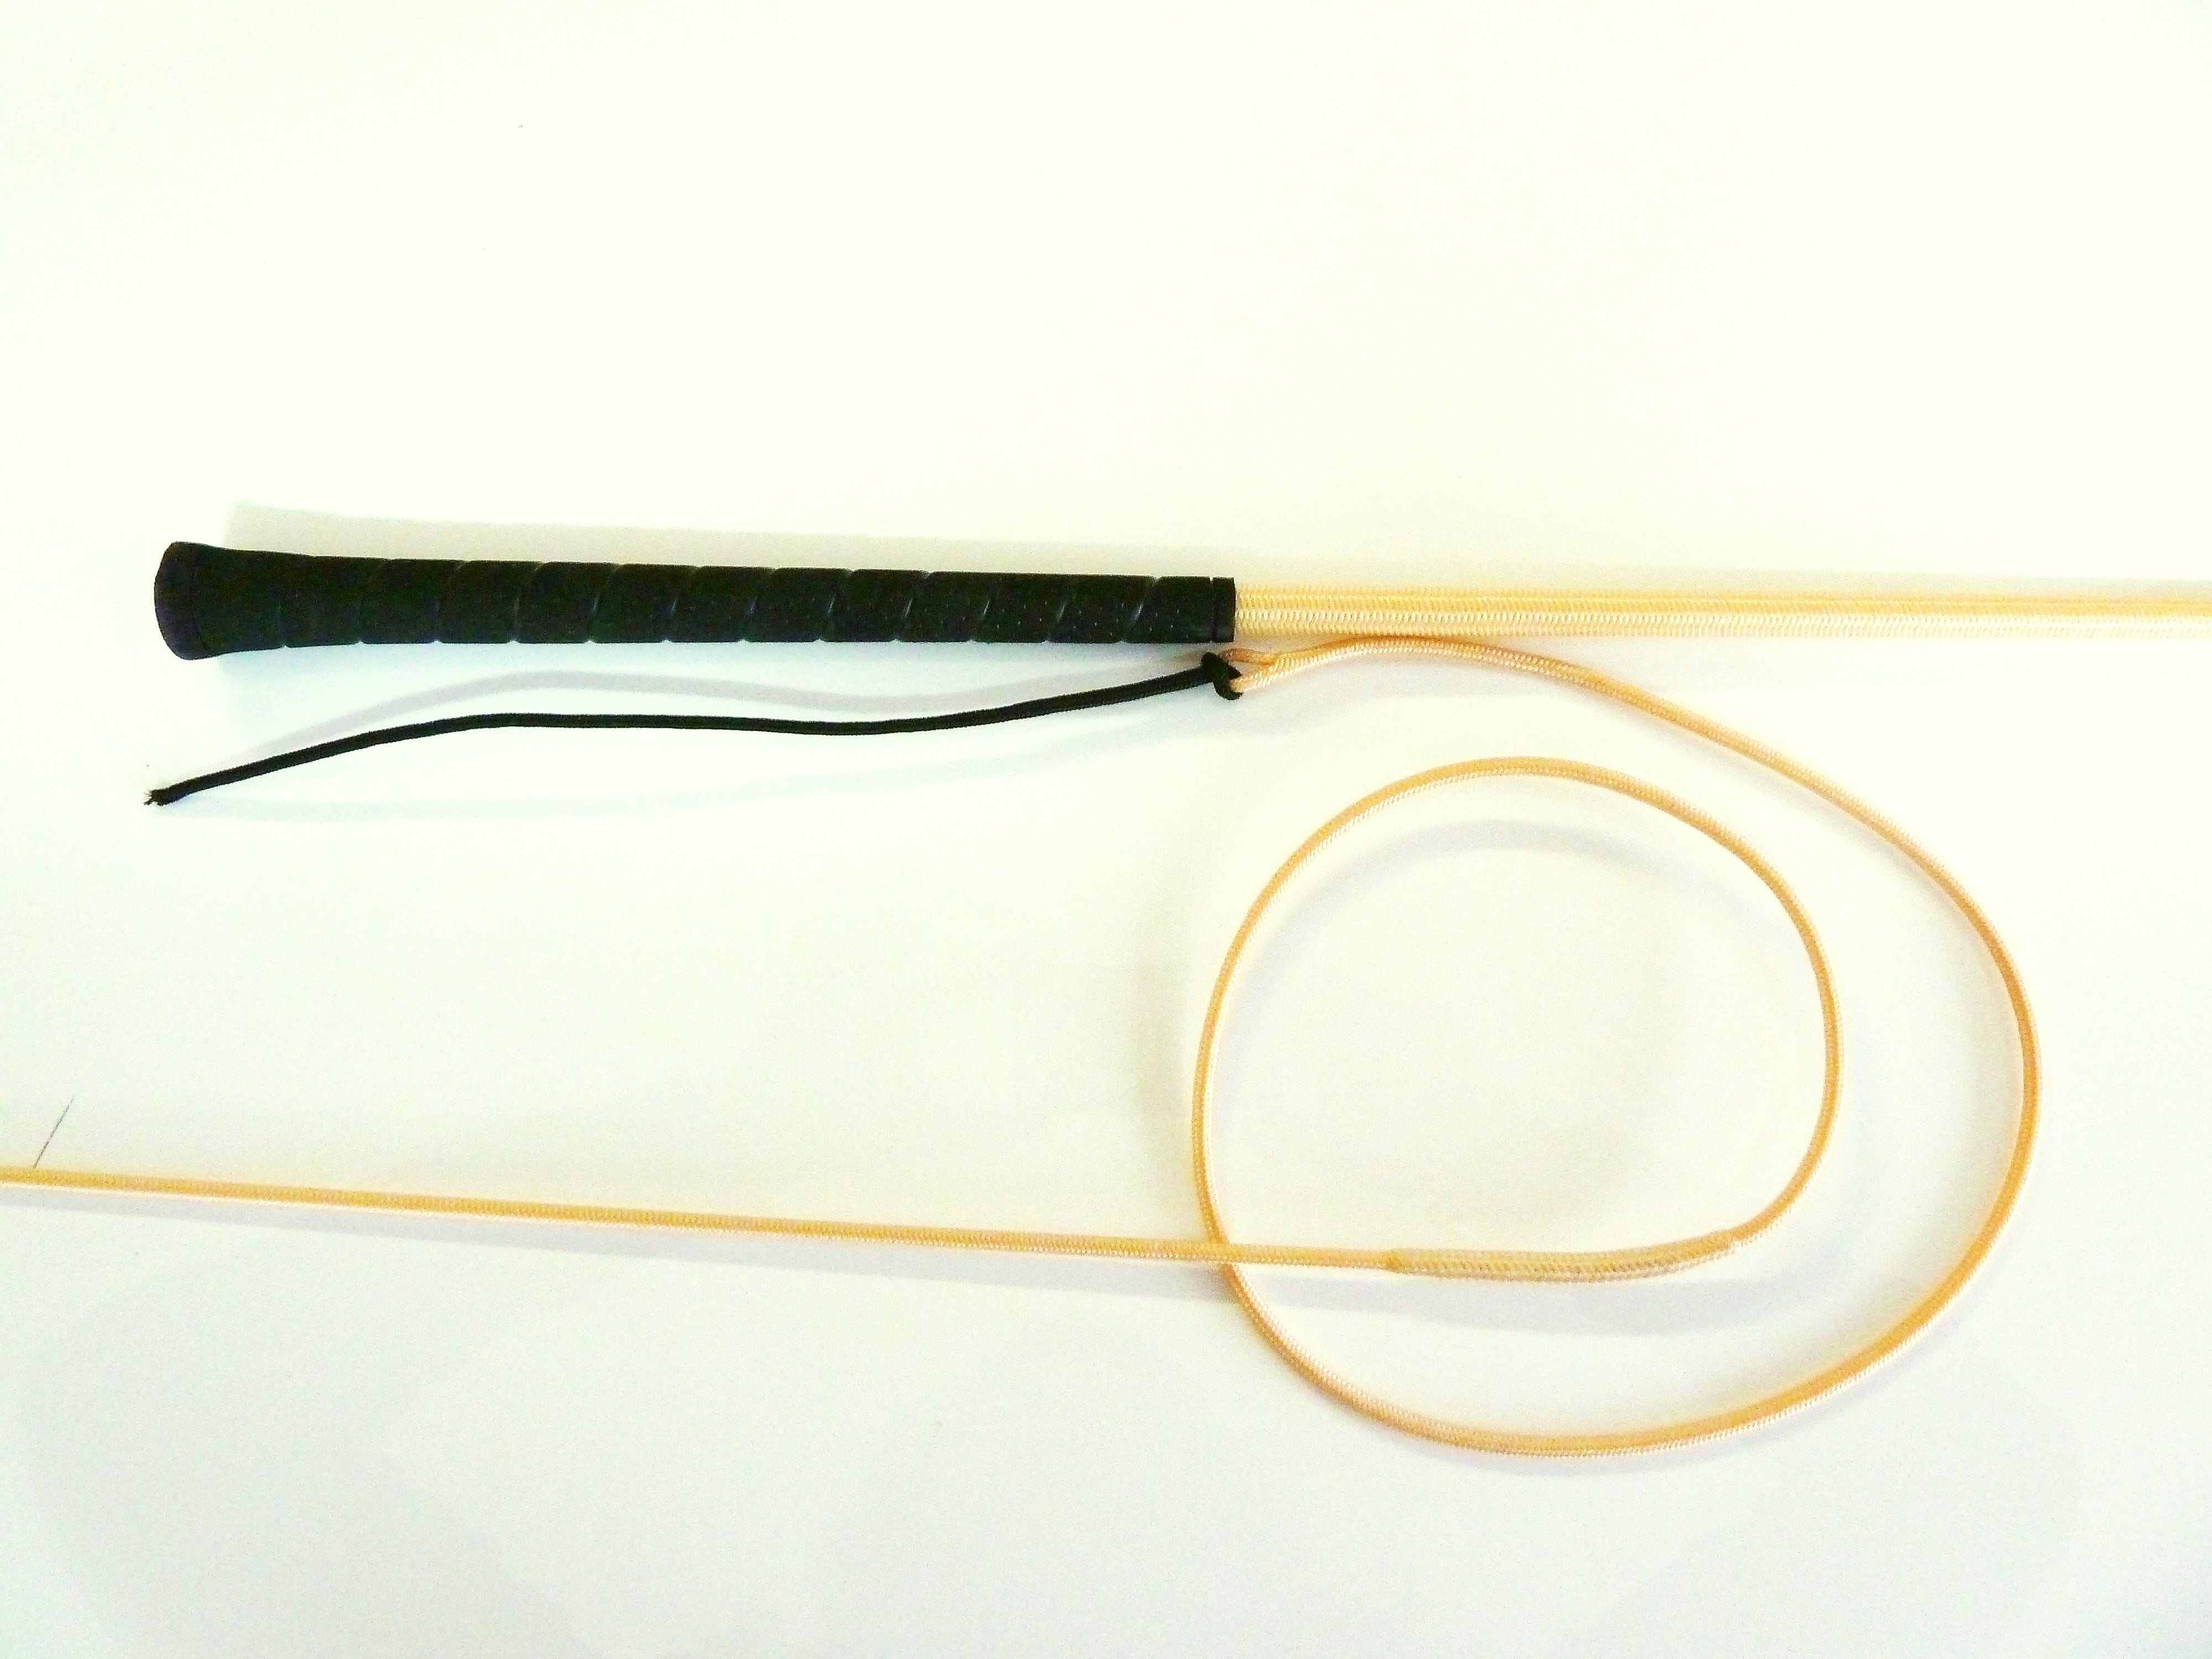 Bow whip 120 cm or 100 cm with Fleck handle